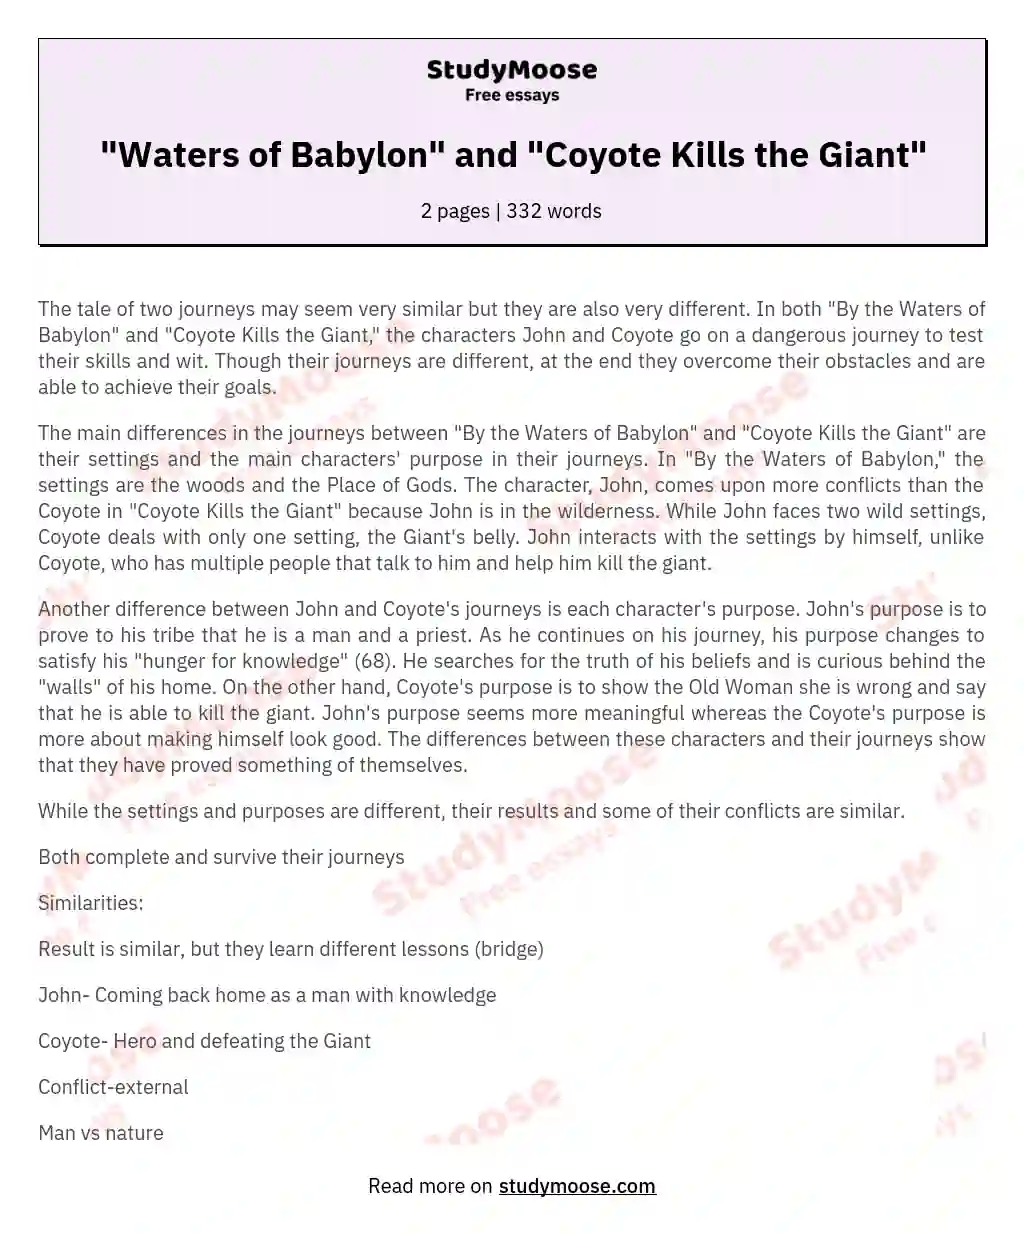 "Waters of Babylon" and "Coyote Kills the Giant"